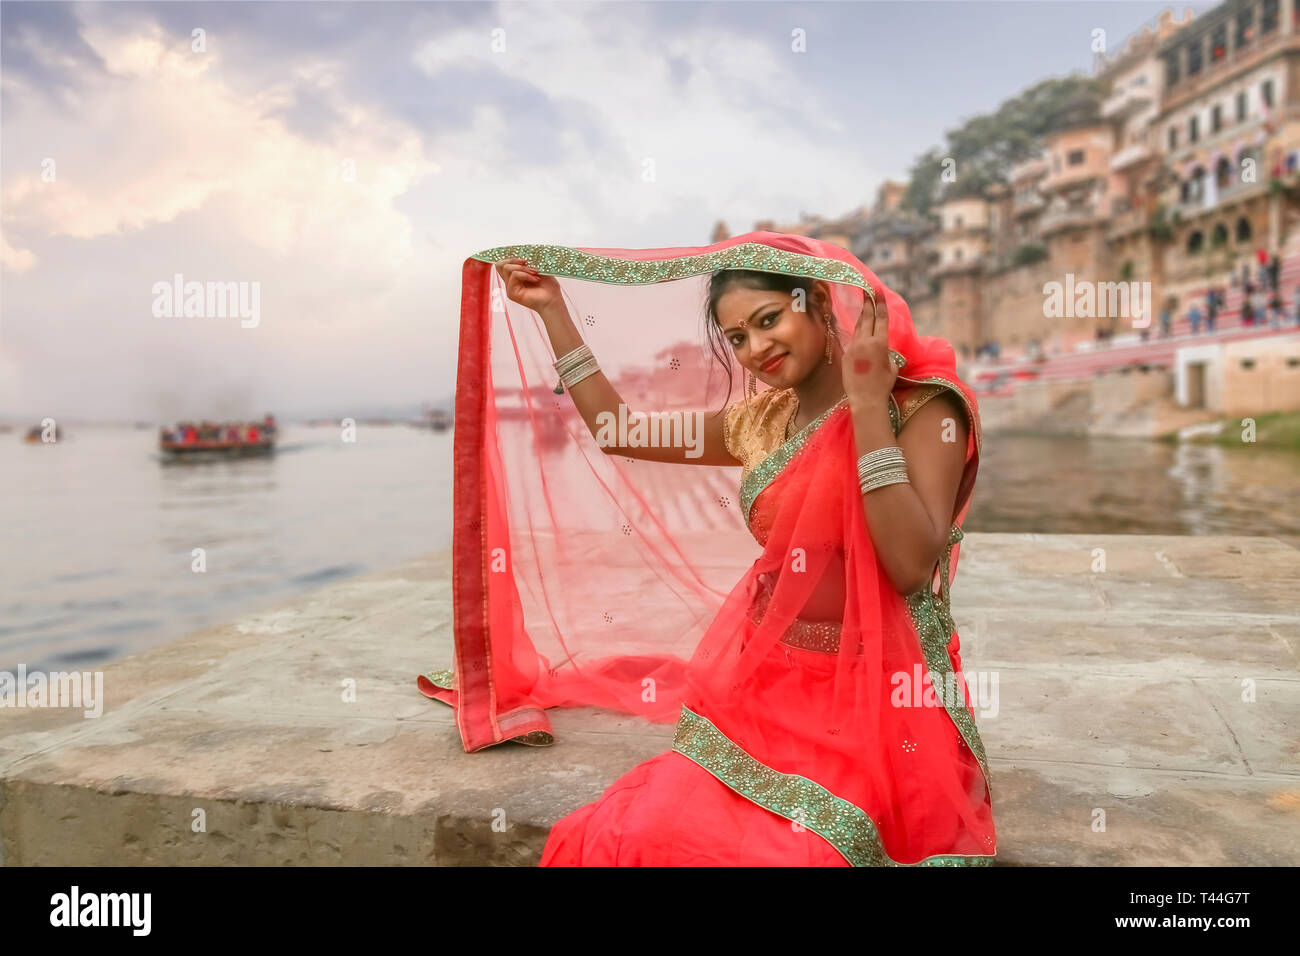 young indian girl in traditional dress saree pose for a photo overlooking the historic varanasi city architecture and ganges river ghat at twilight T44G7T